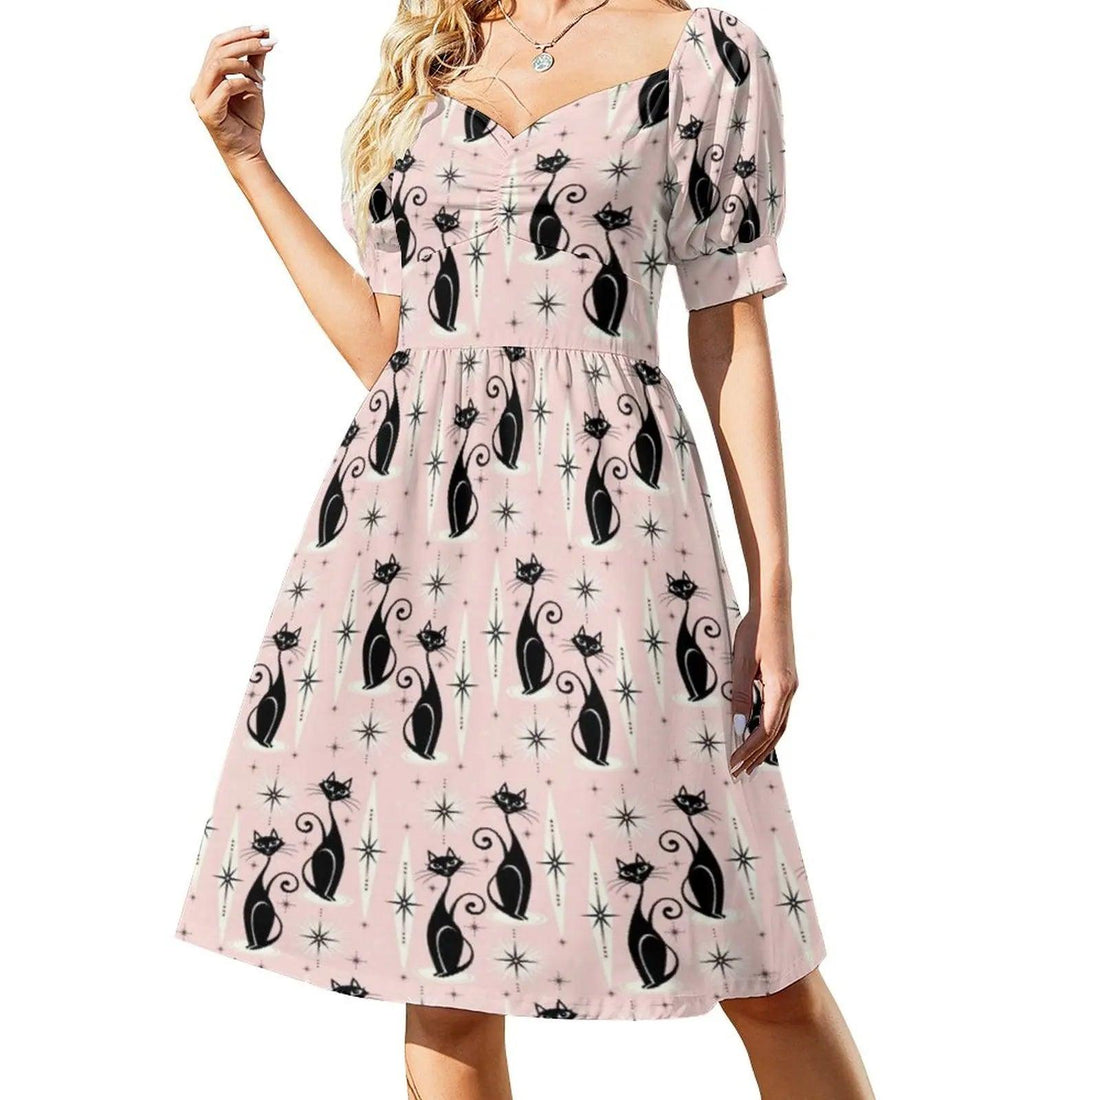 Verious Catroon Cat Print dresses, S-5XL, 12 Designs - Just Cats - Gifts for Cat Lovers